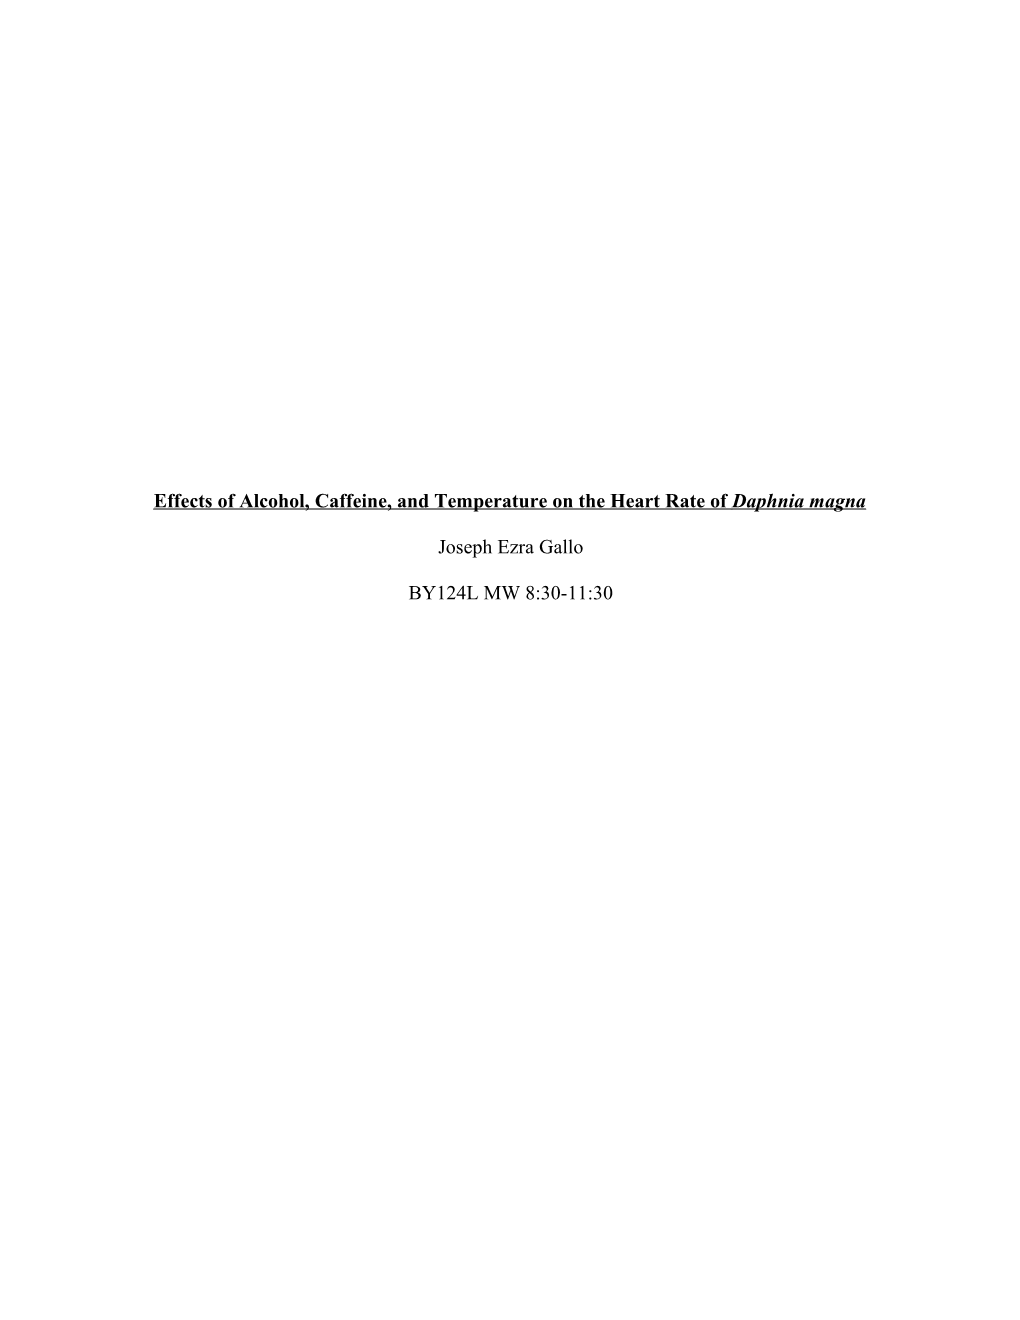 Effects of Alcohol, Caffeine, and Temperature on the Heart Rate of Daphnia Magna